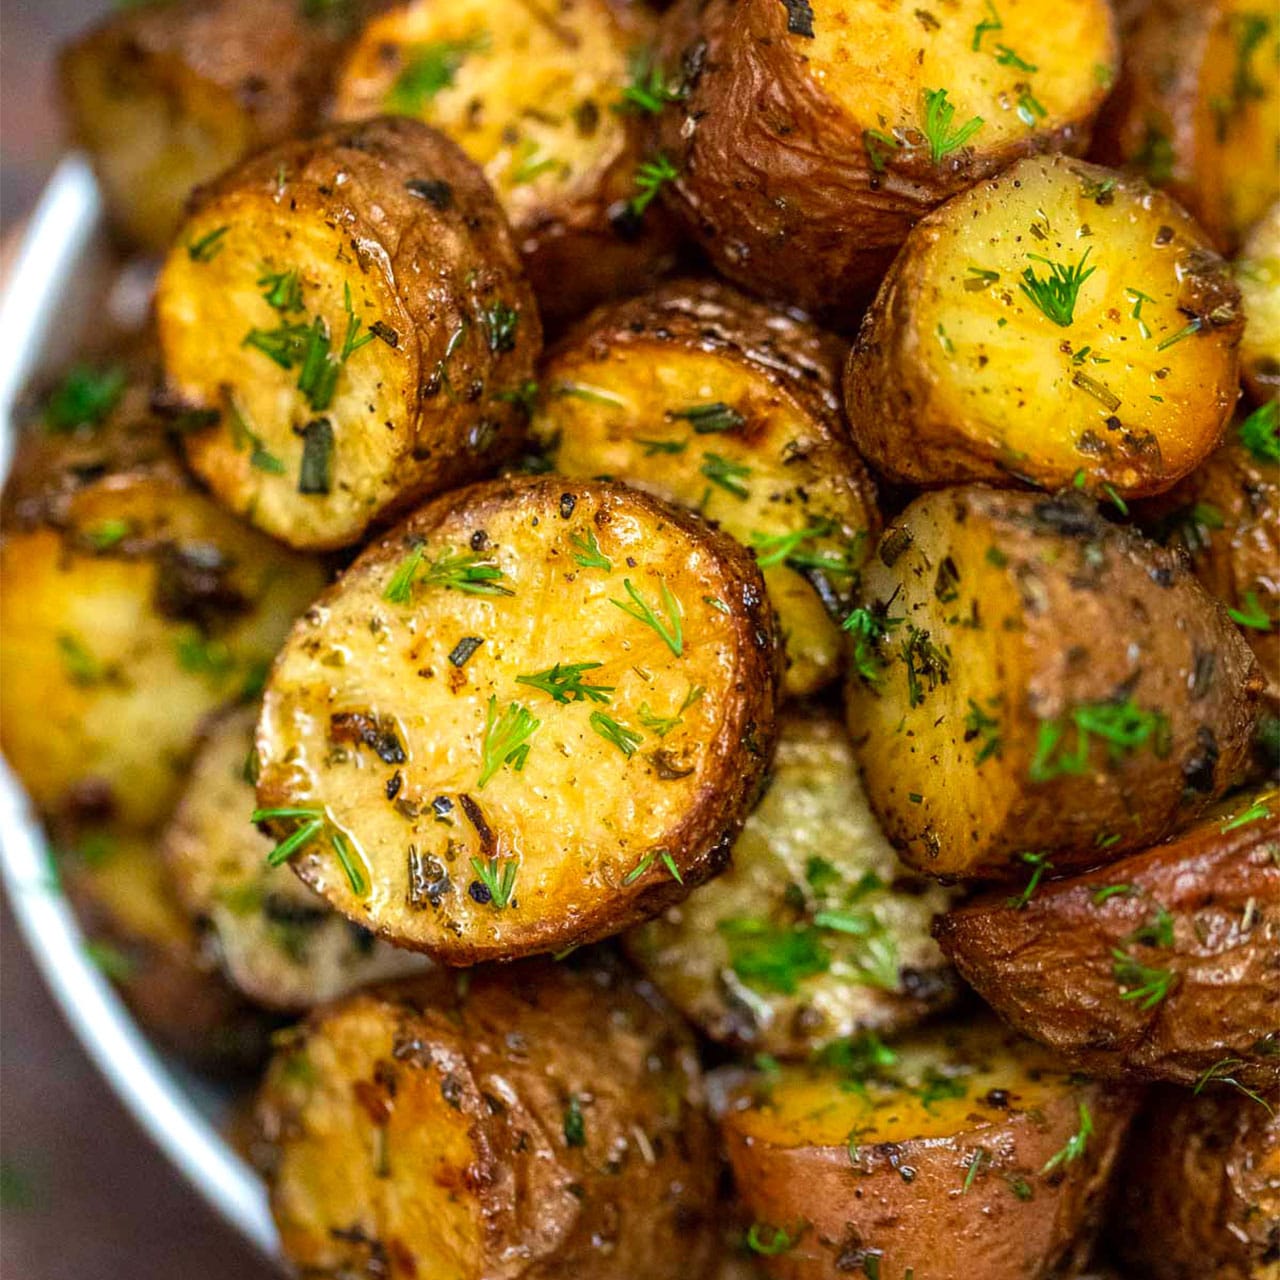 Roasted Red Potatoes Recipe {Oven Baked with Crispy Skin}